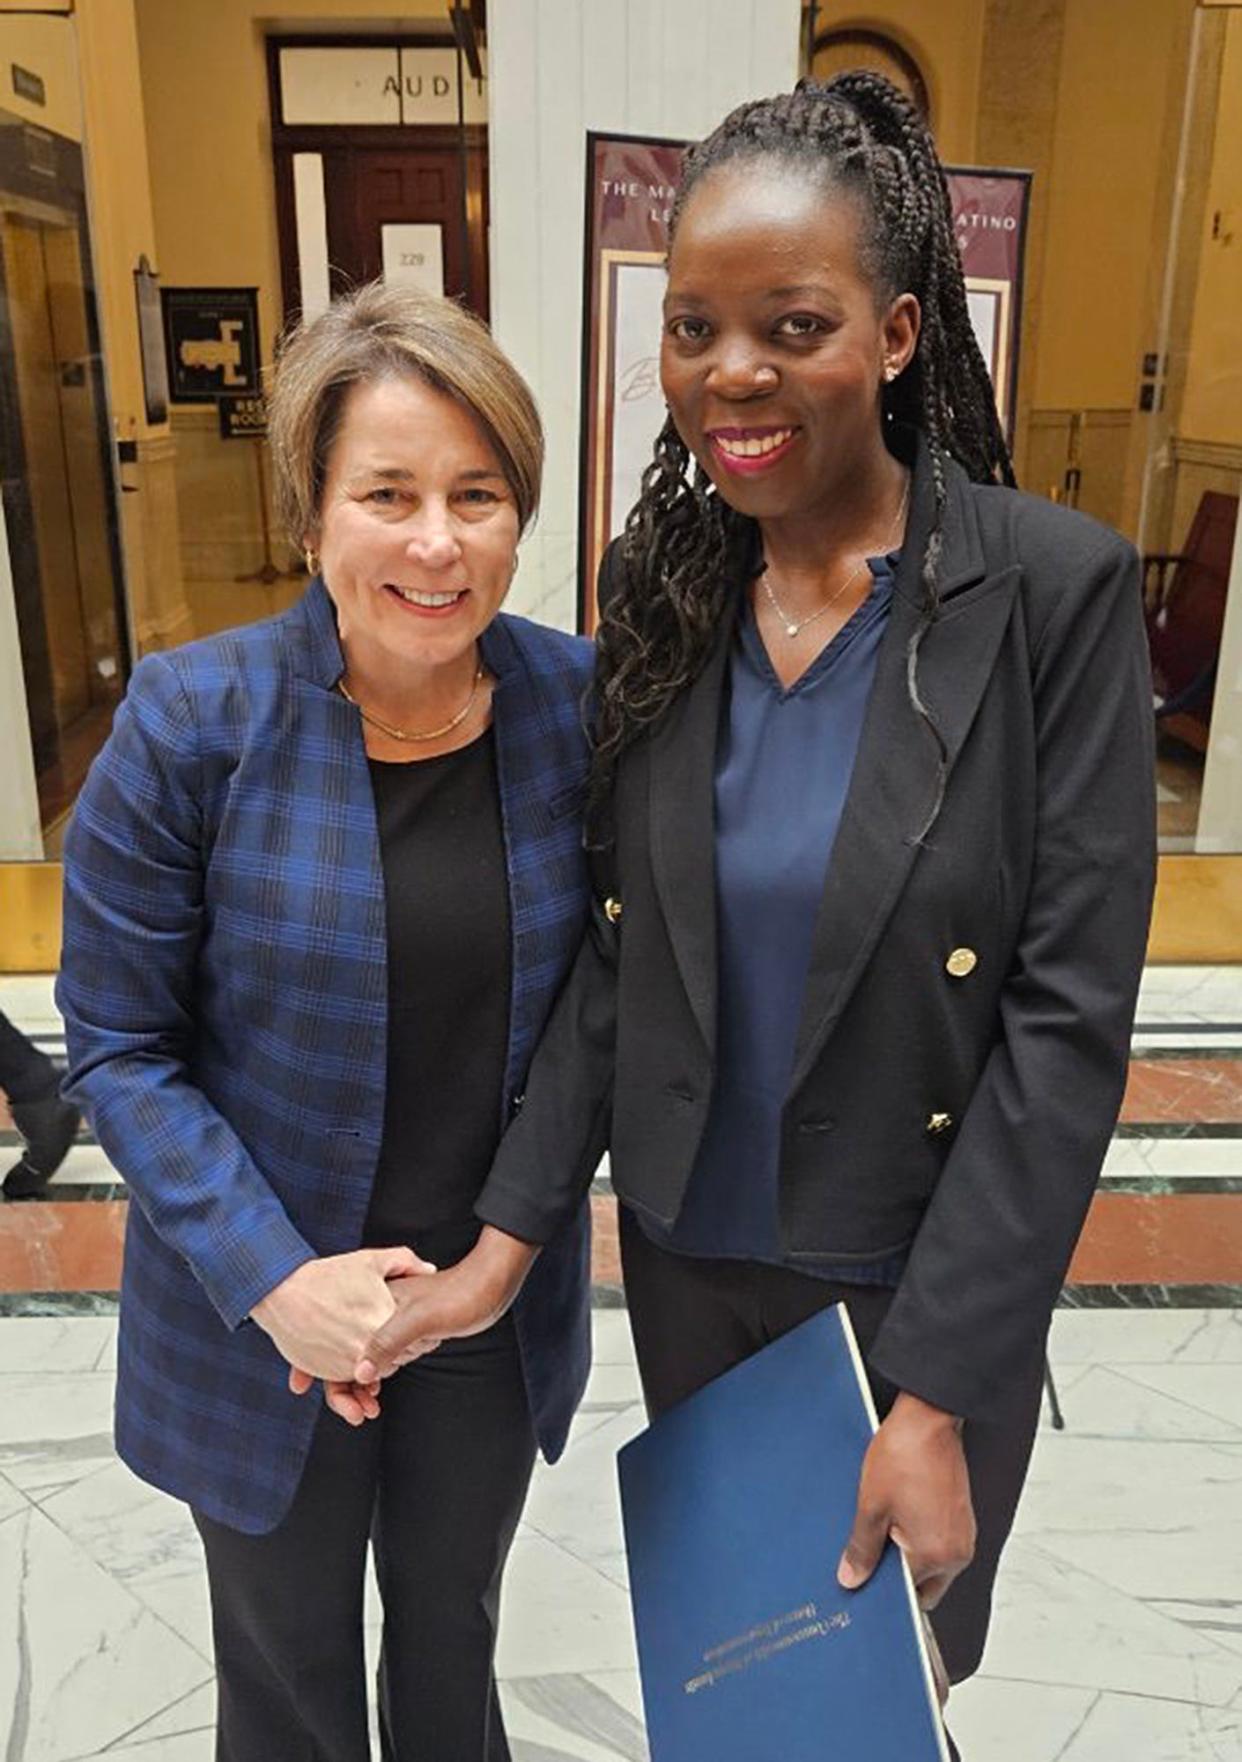 Norah Zoummar, left, co-owner of 33 All American Diner in Ashland, poses with Gov. Maura Healey at the State House after being presented with a Black Excellence Award, which is sponsored by the Massachusetts Black and Latino Legislative Caucus. A Ugandan singer, Zoummar raises money to support women and children in her home village of Namwendwa.